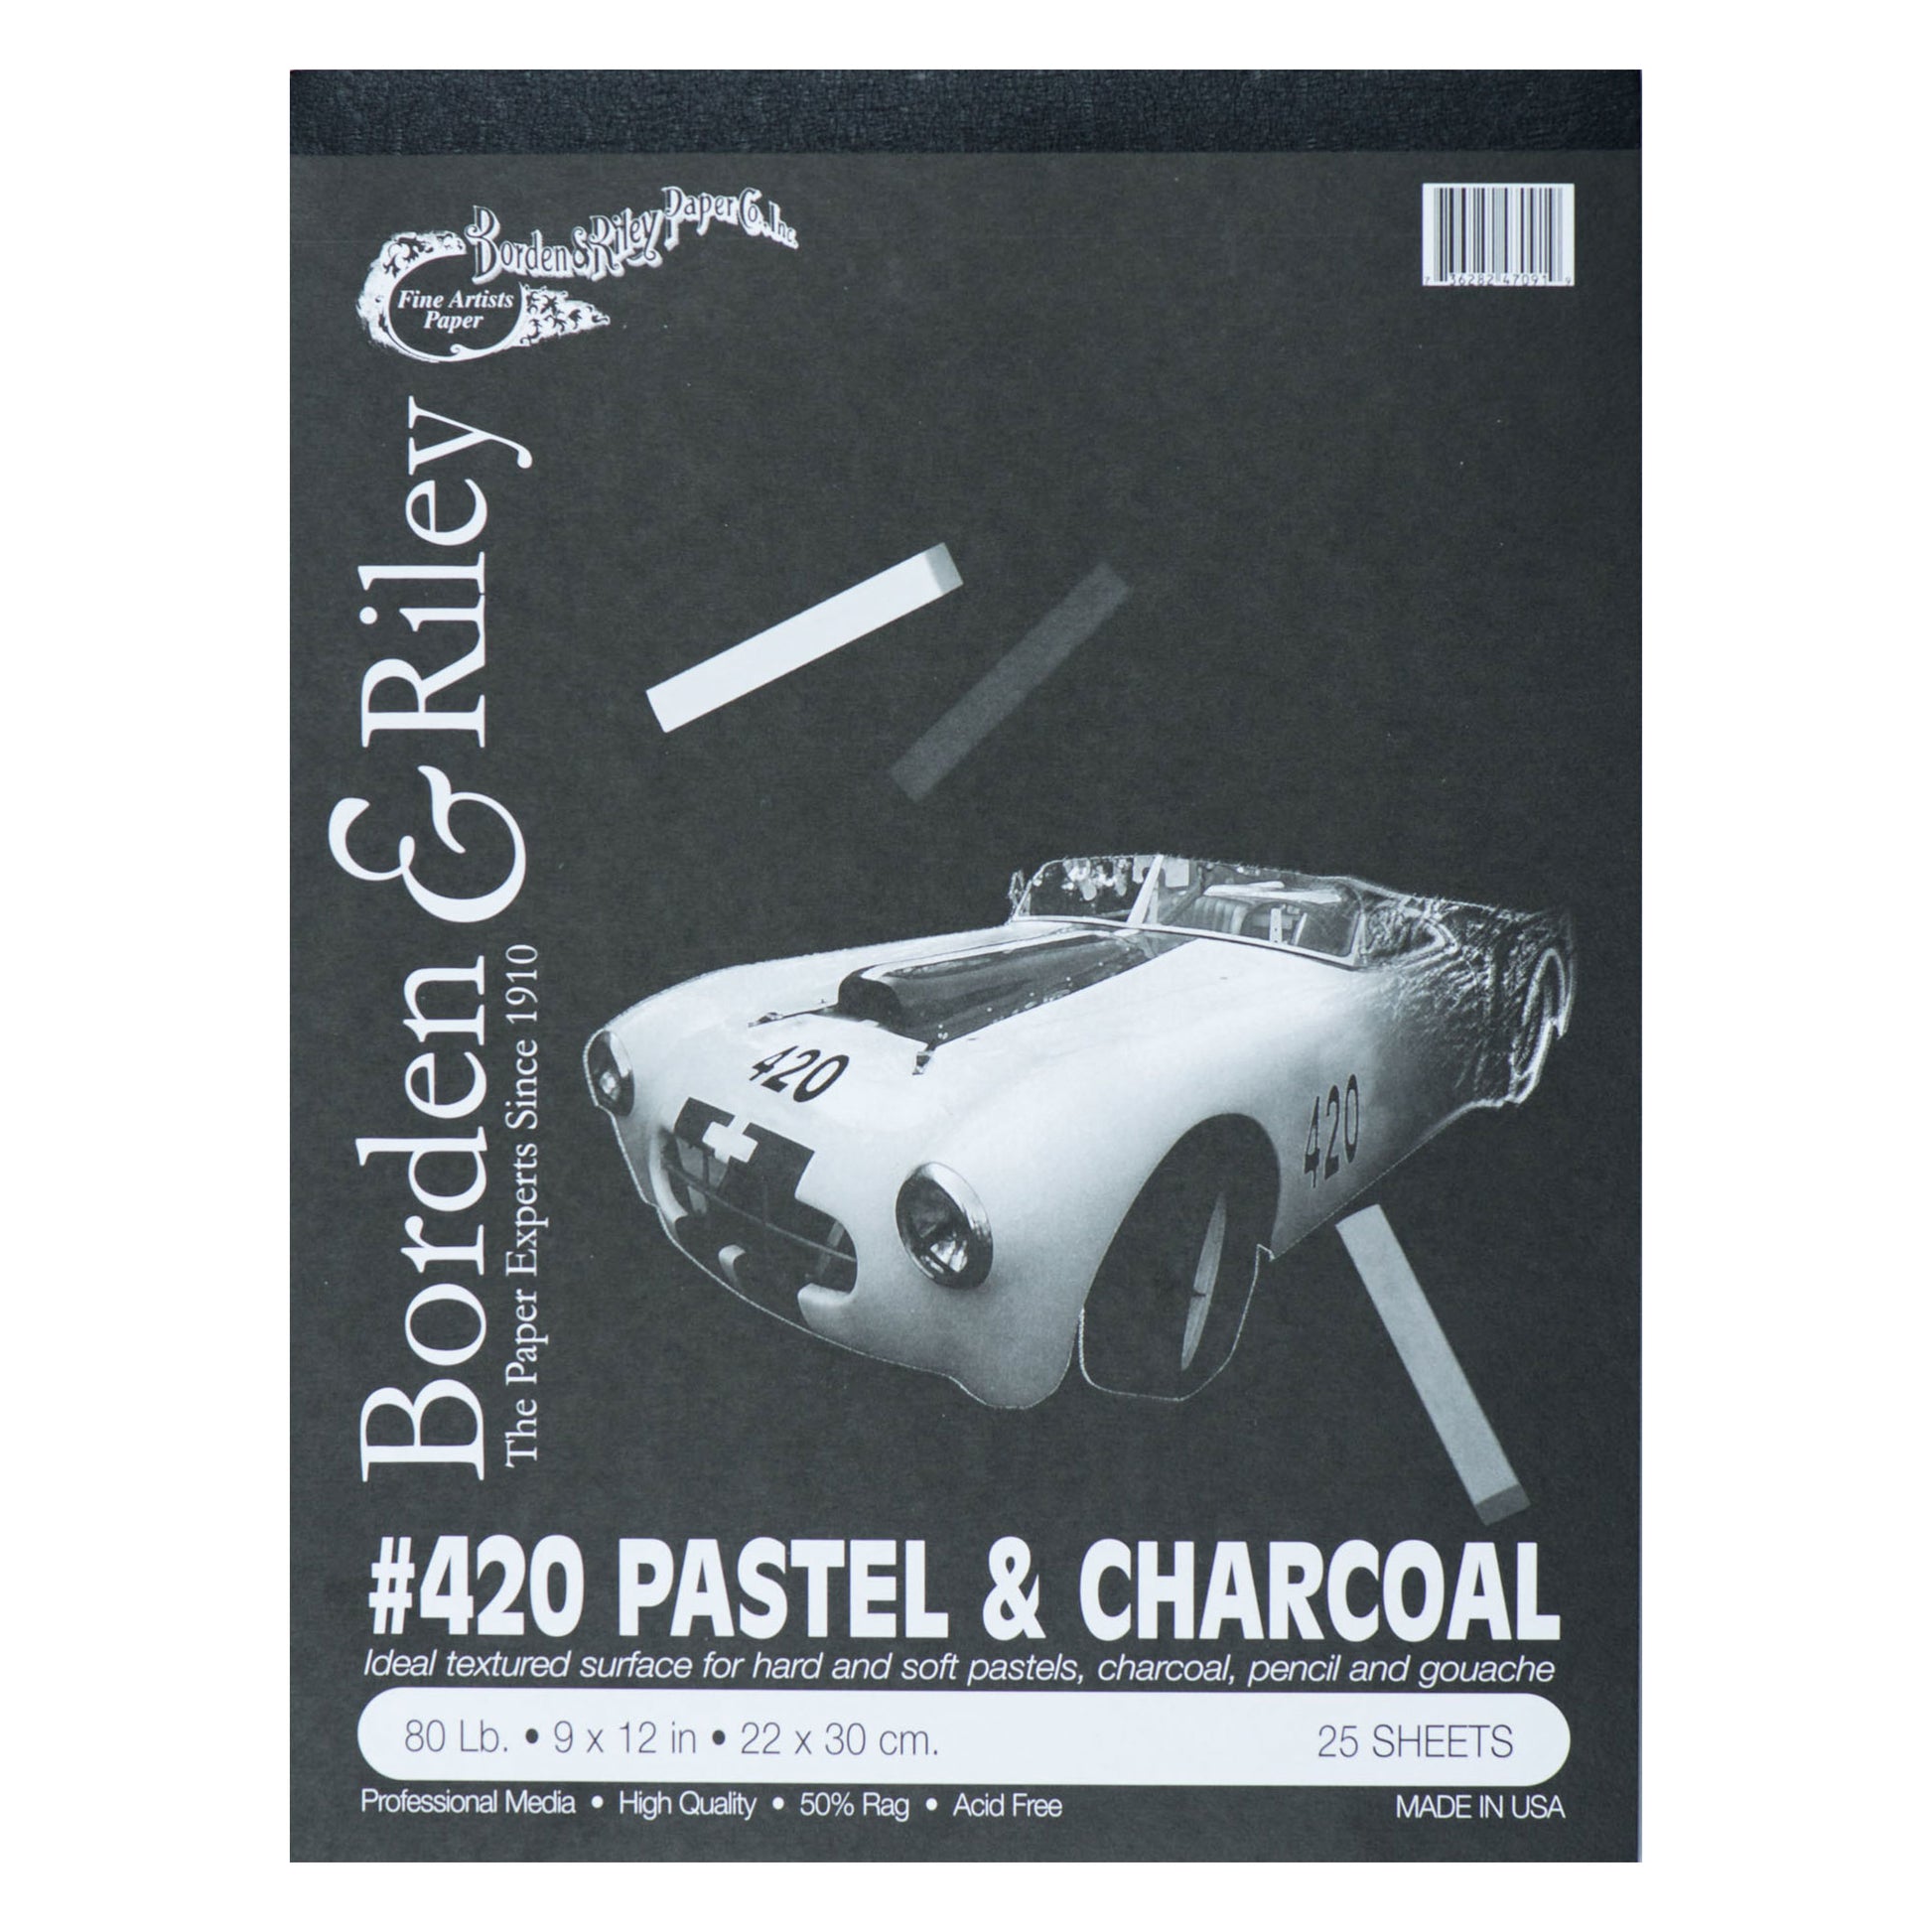 Strathmore Acid-Free Quality Charcoal Drawing Paper - Black, Pack